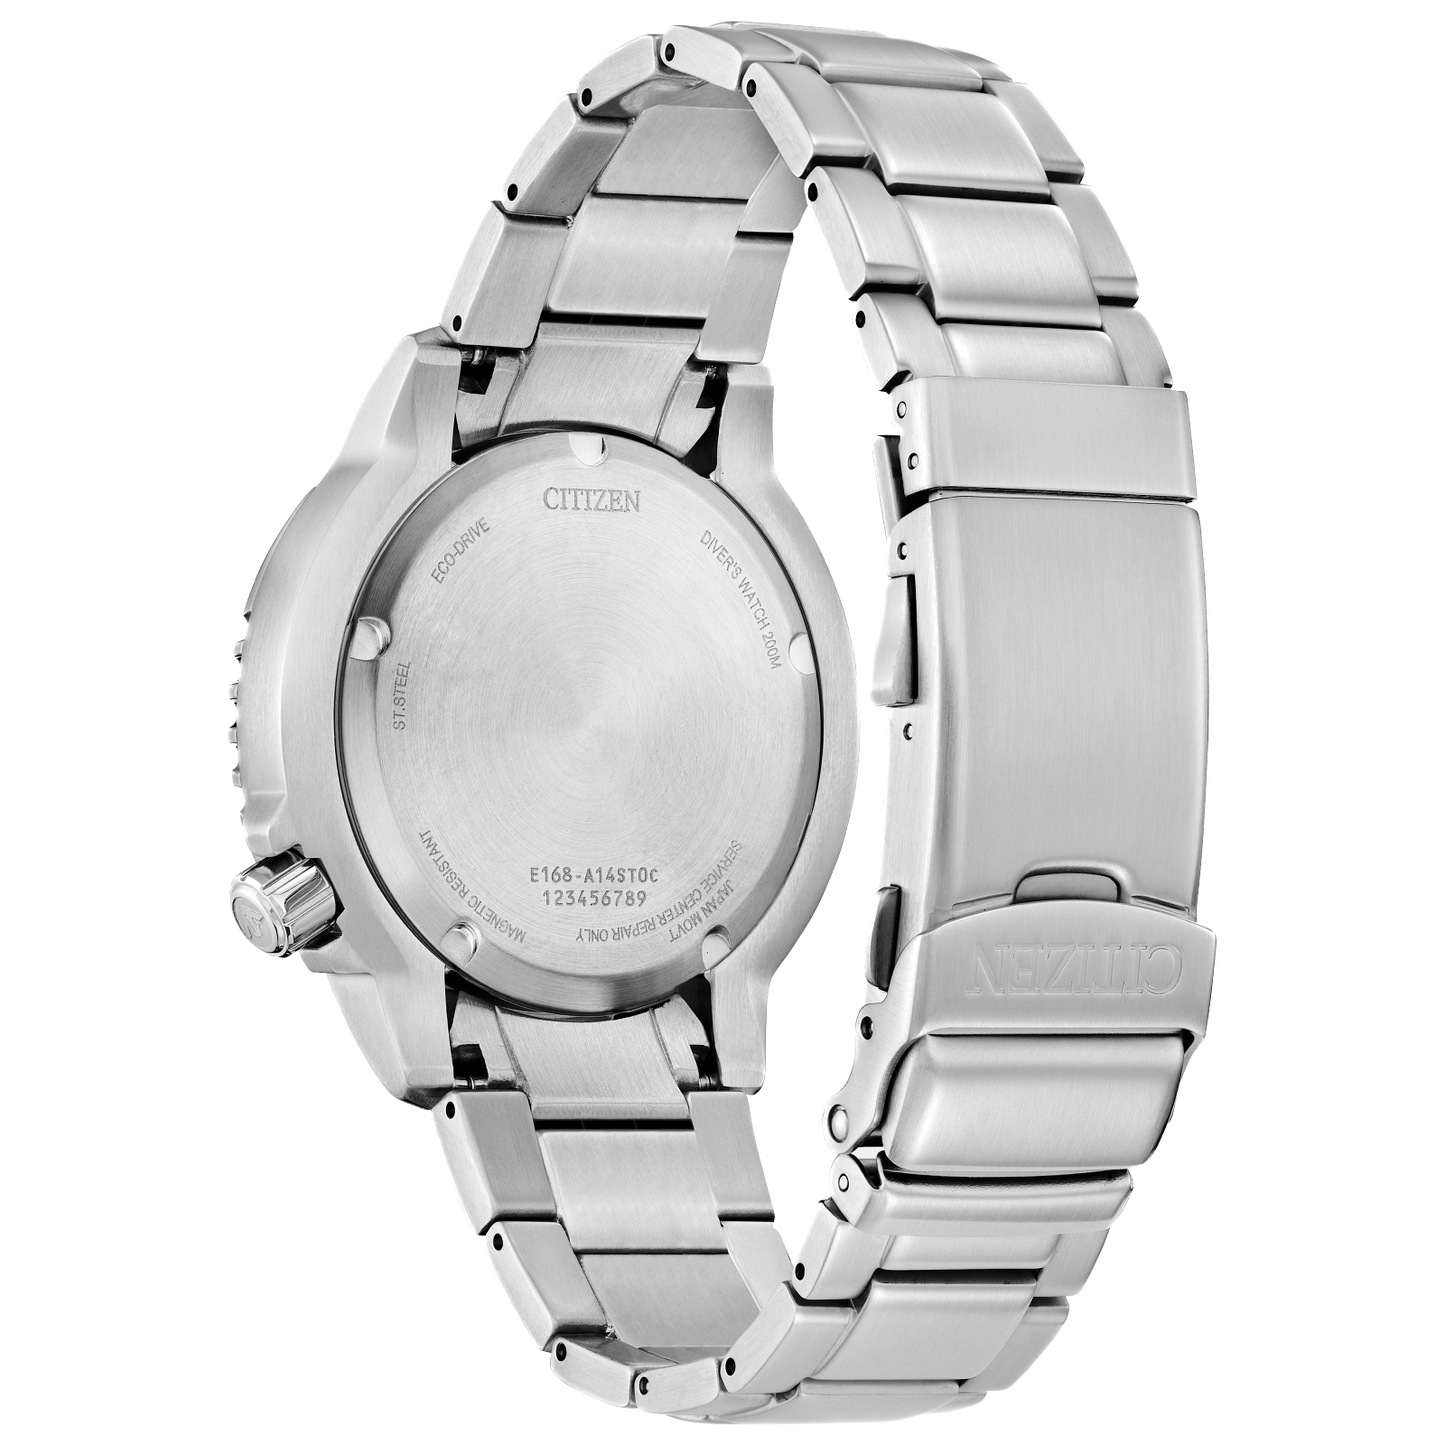 Promaster Dive Stainless Steel Watch BN0165-55L